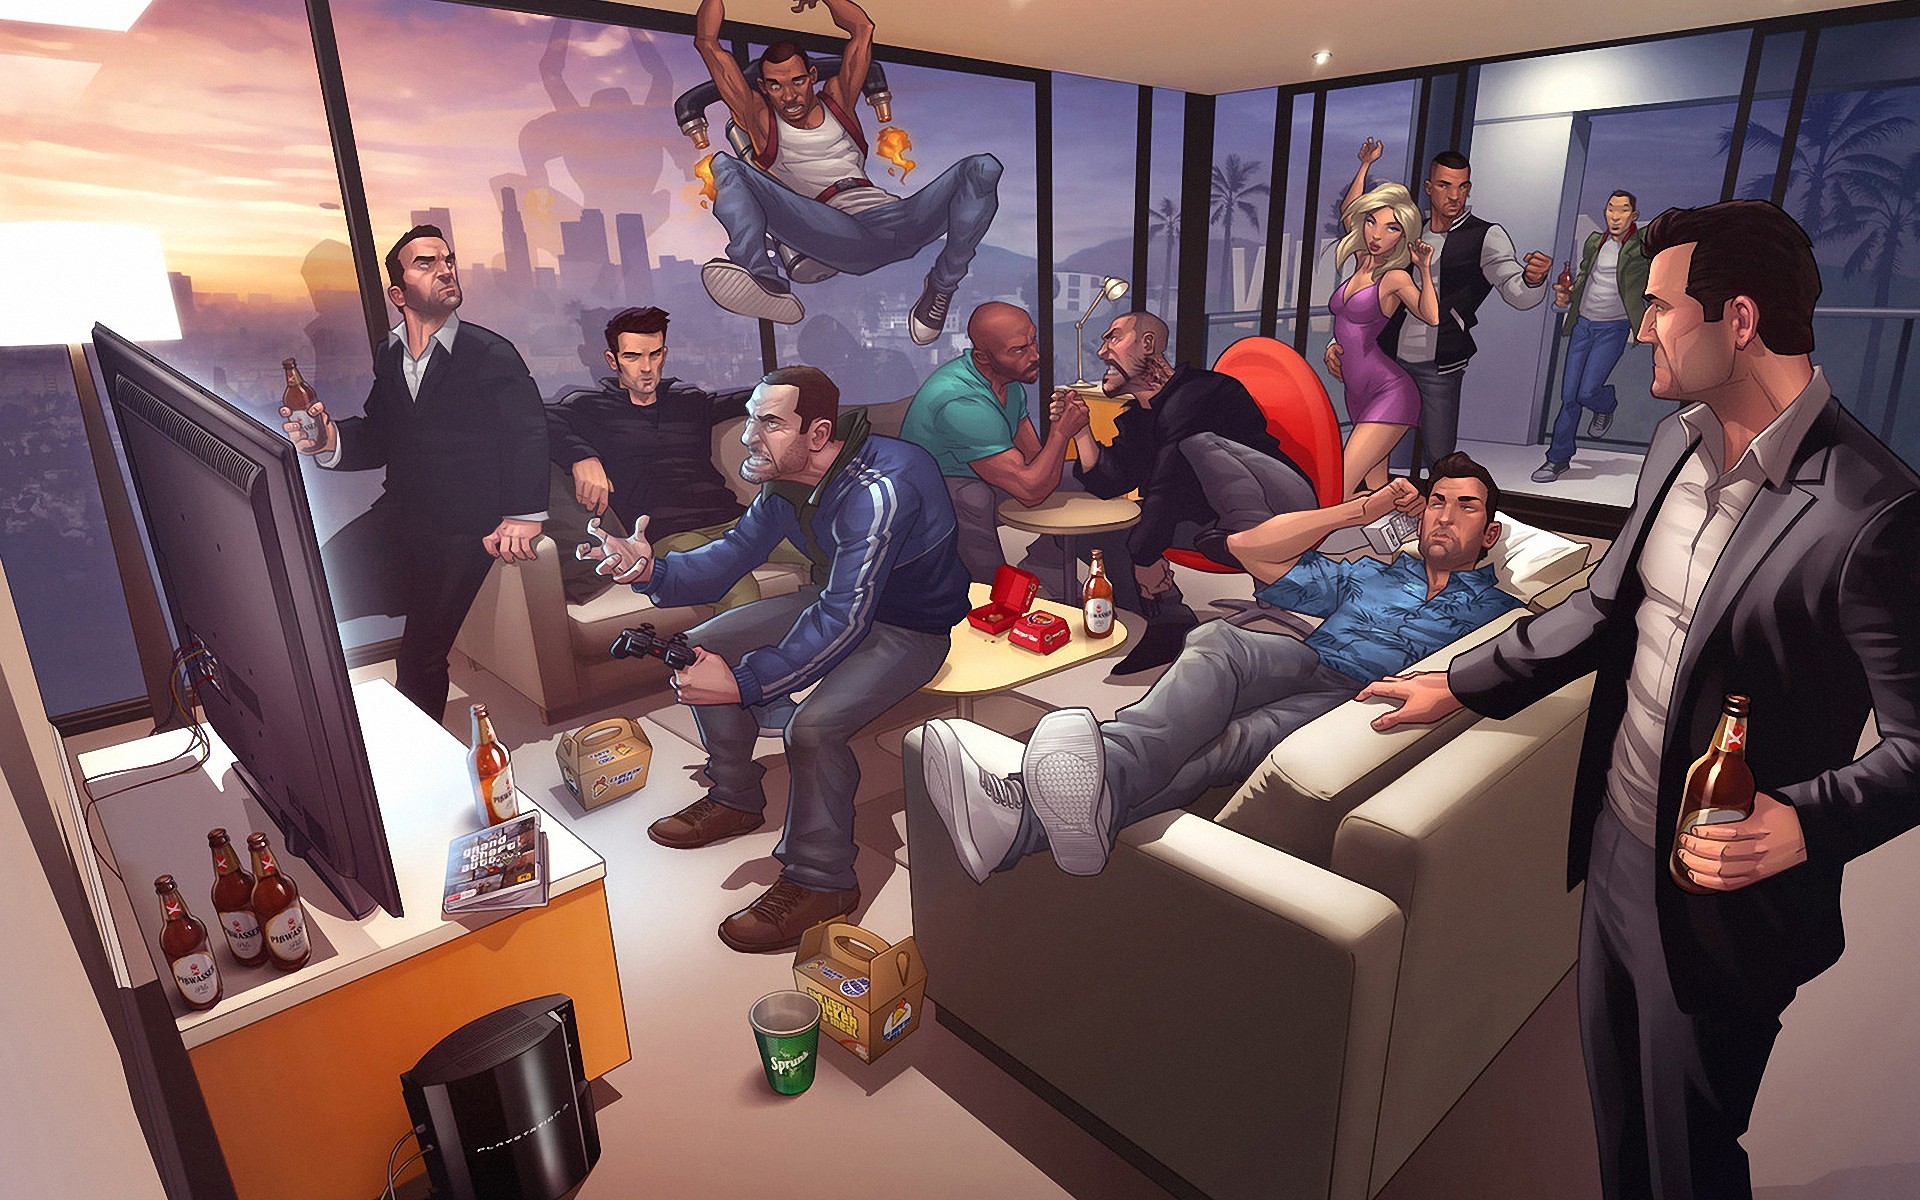 digital Art, Grand Theft Auto, PlayStation 3, Jetpack, Couch, TV Wallpaper